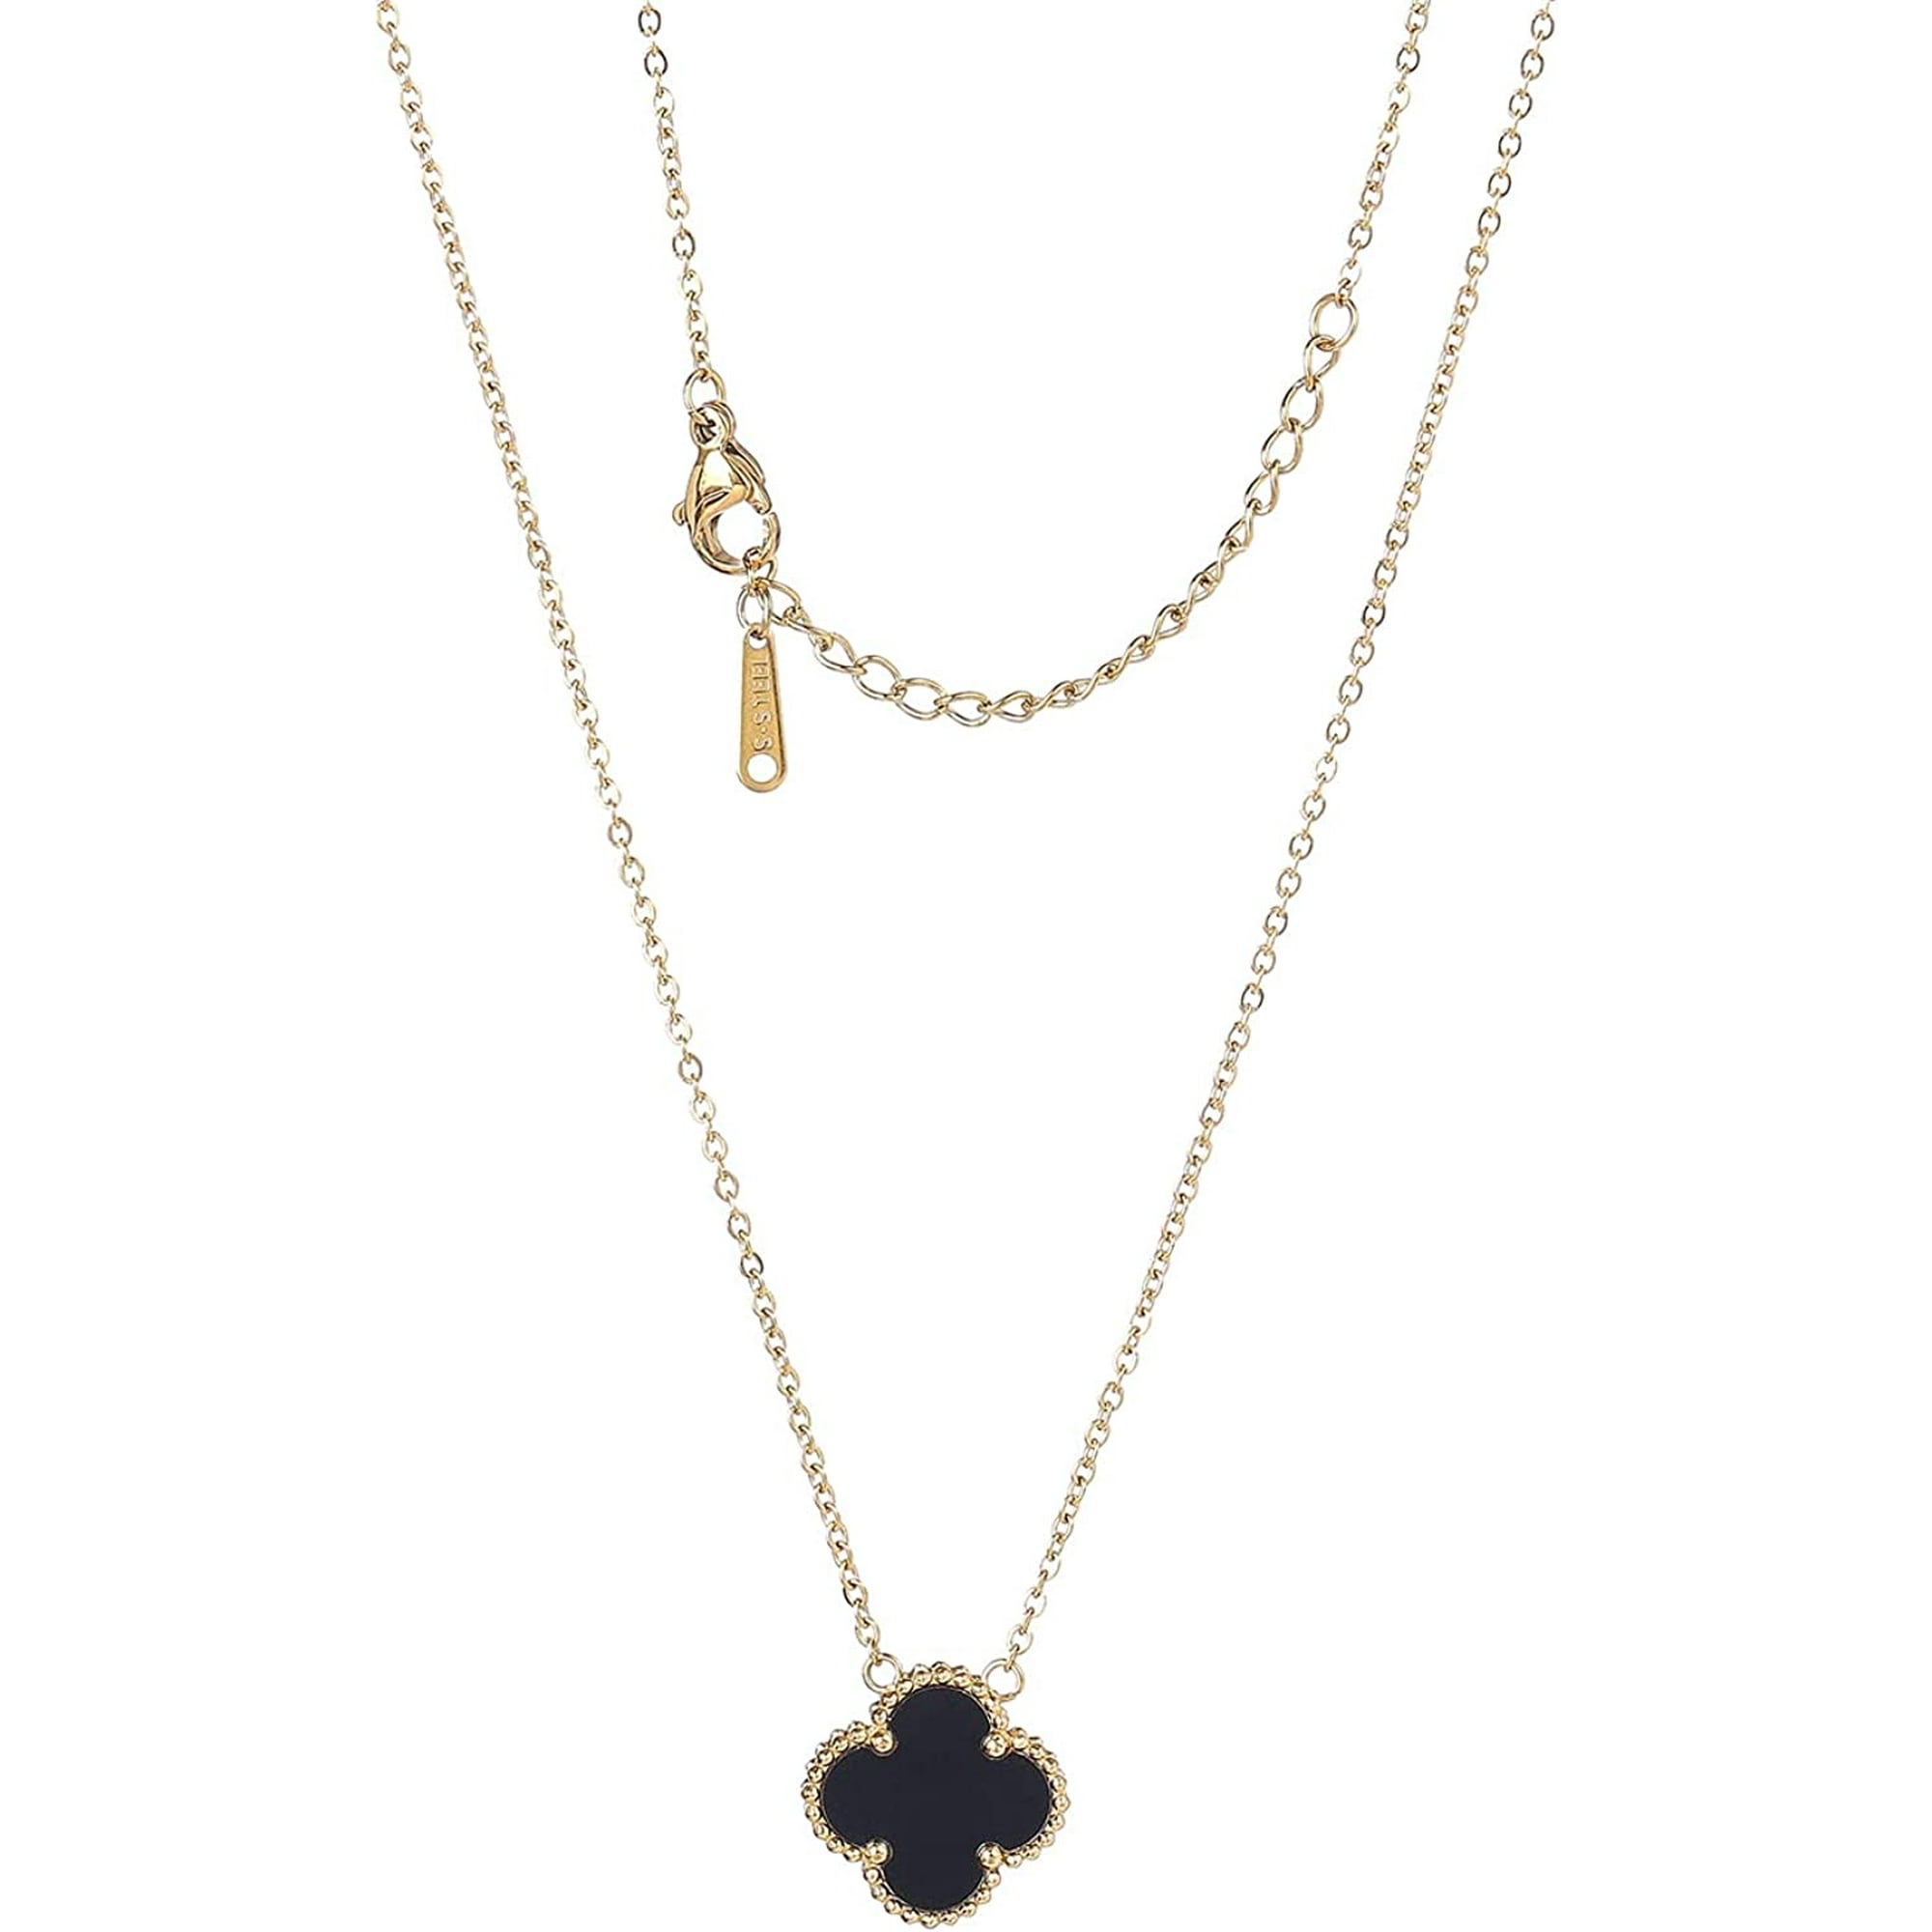 Dainty Stainless Steel Gold Clover Crystal Necklace